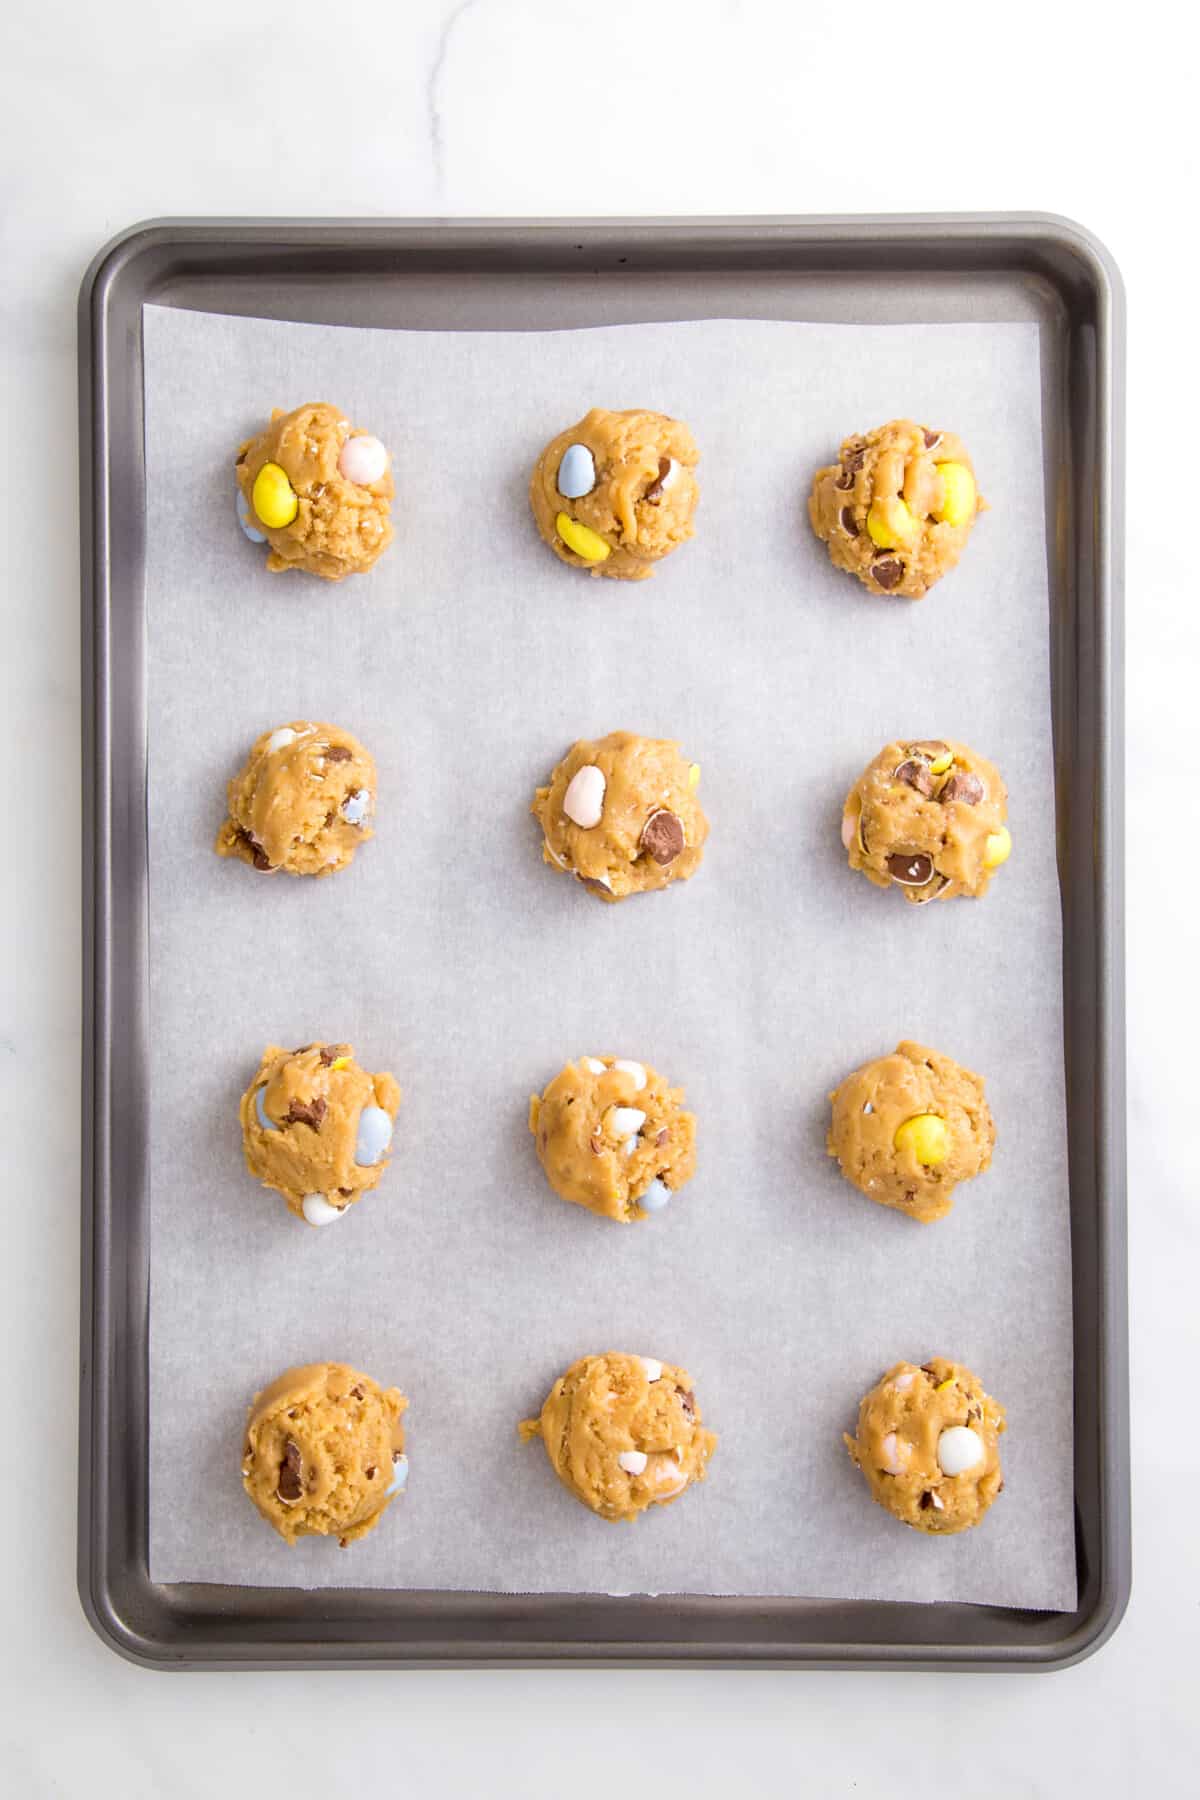 12 unbaked cadbury egg cookie dough arranged on a parchment lined baking sheet.